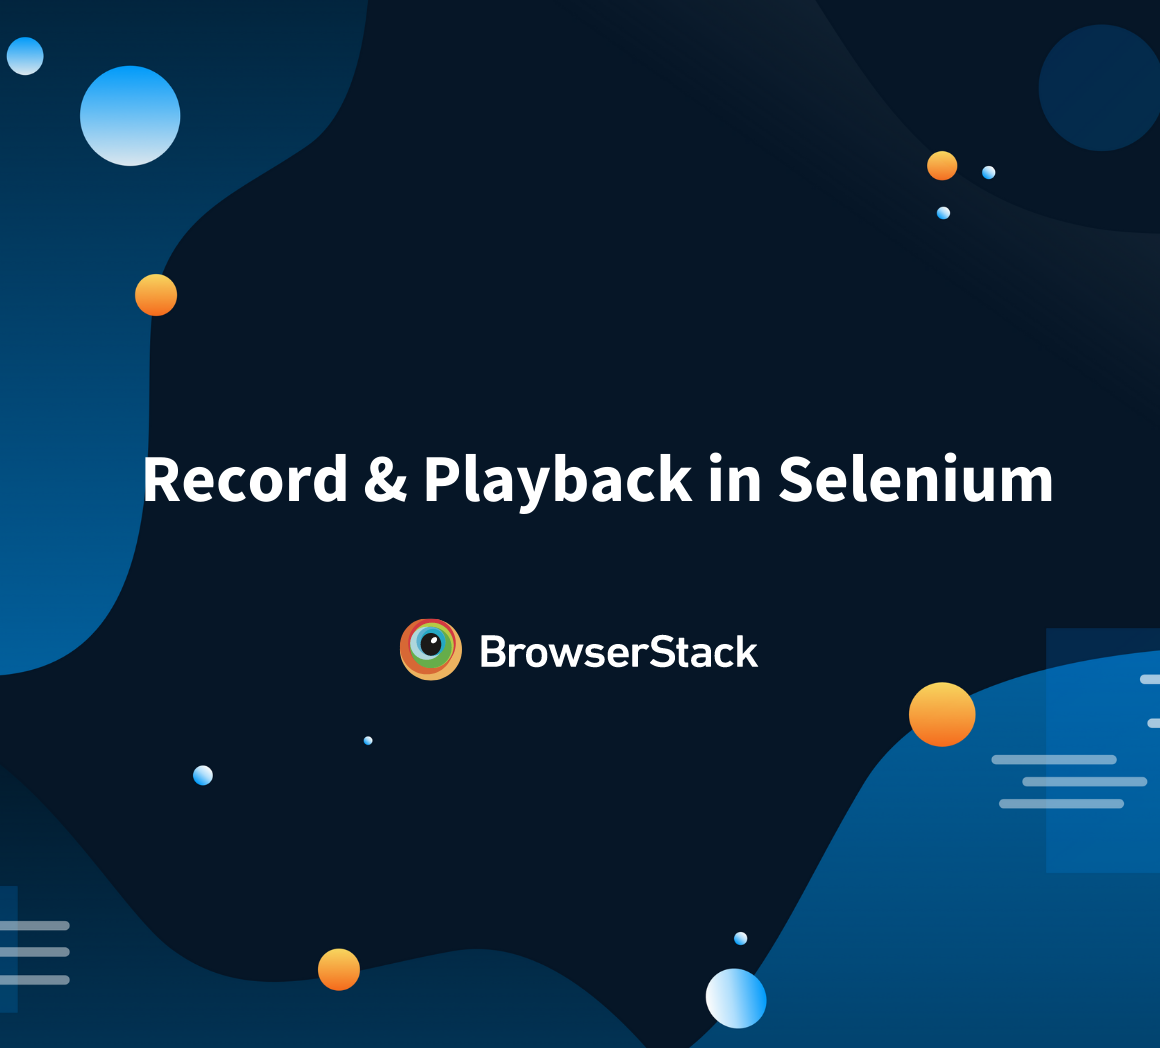 How to use record and playback in Selenium